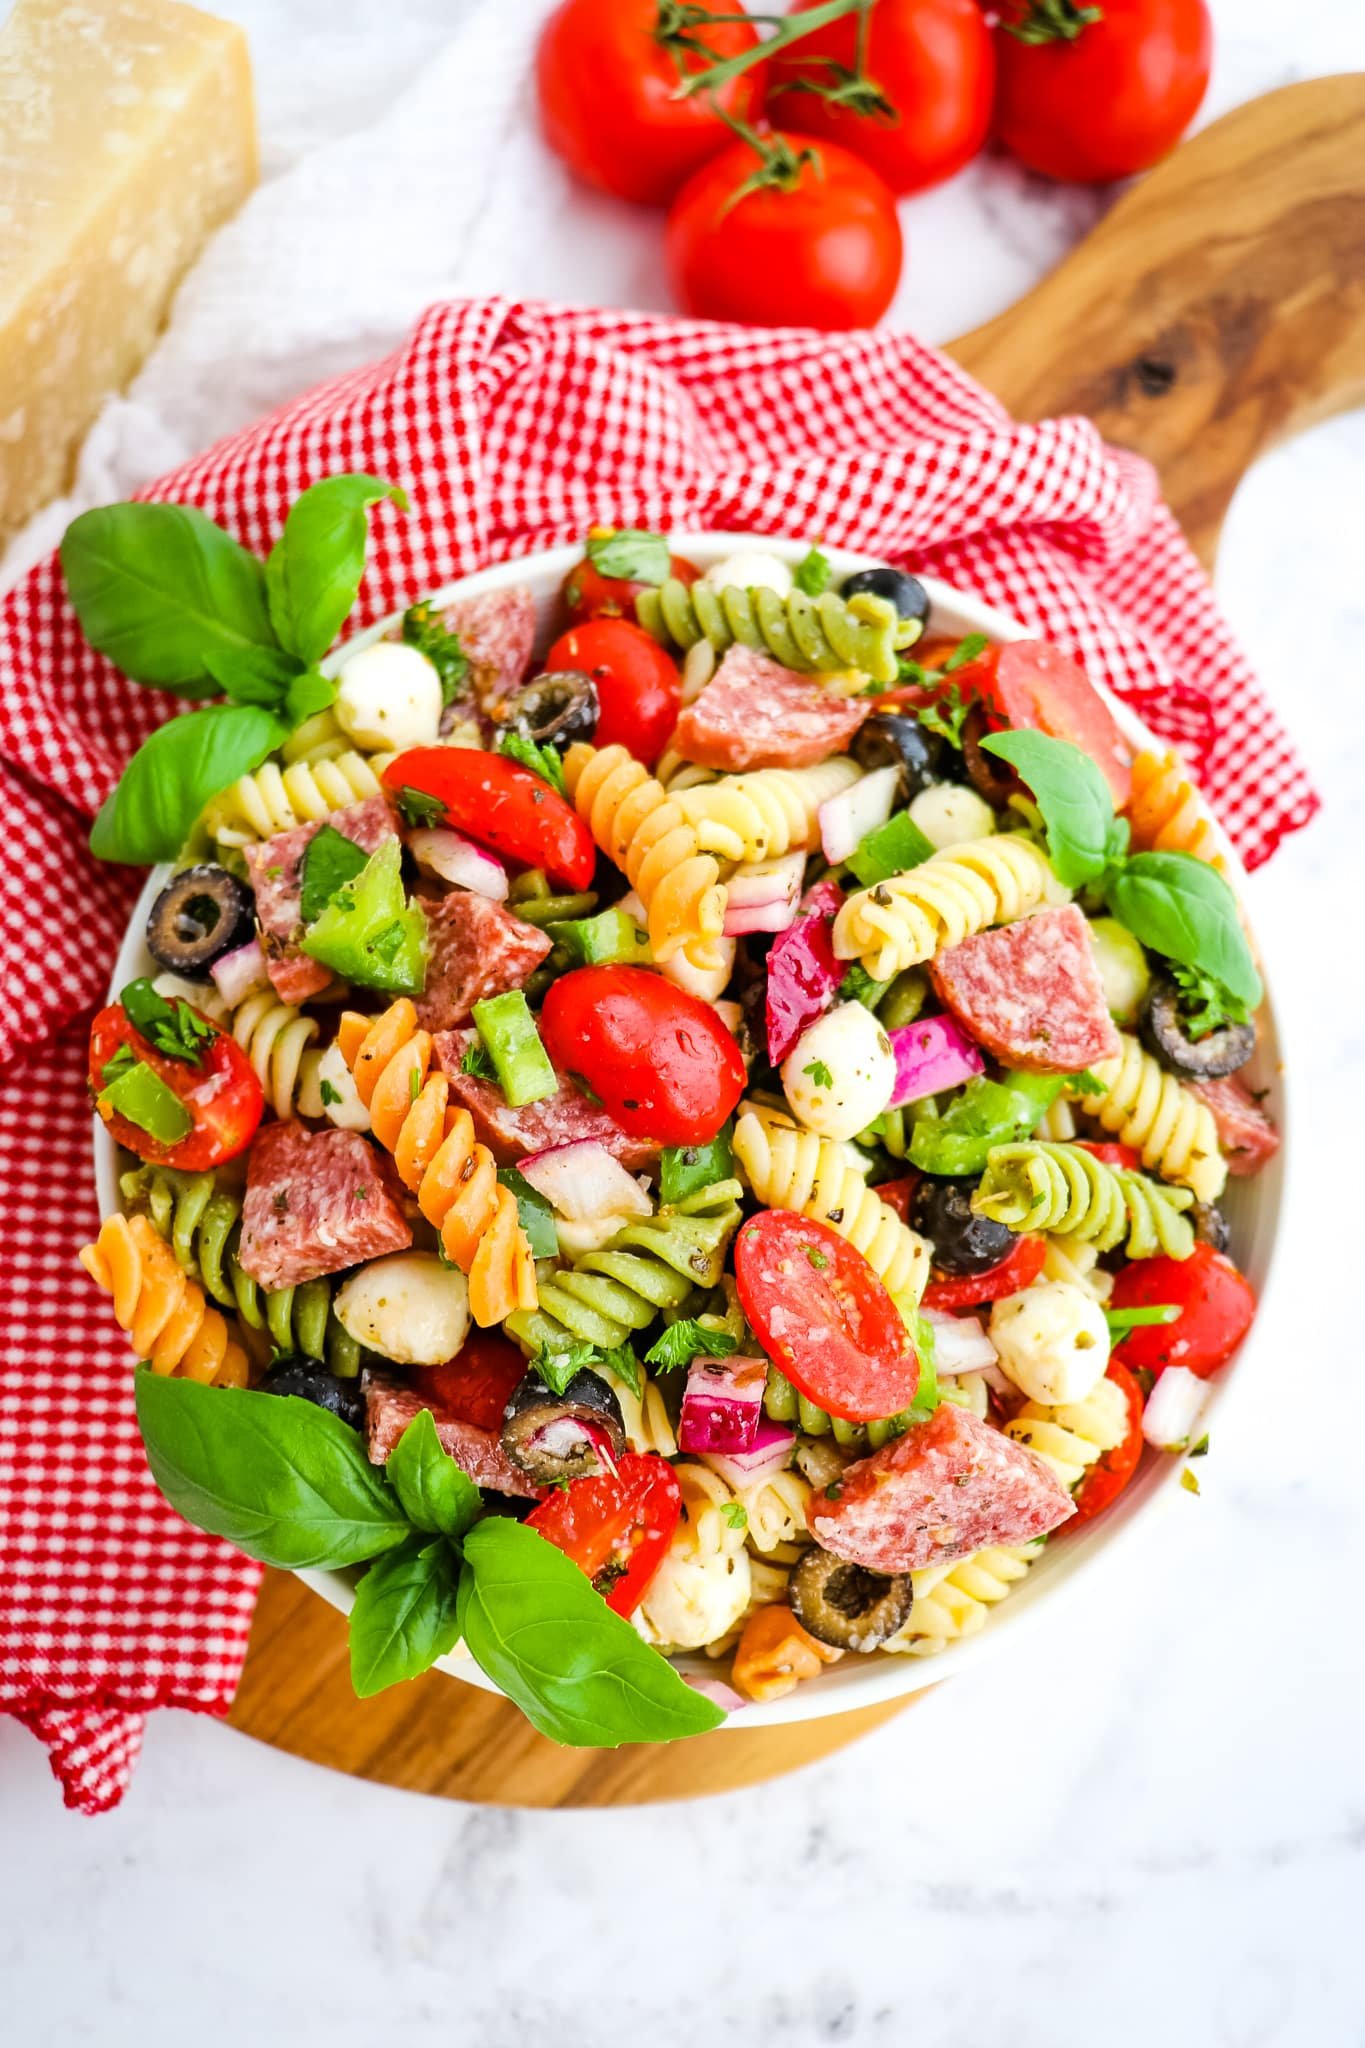 Italian pasta salad in bowl, garnished with tomatoes and fresh basil leaves.